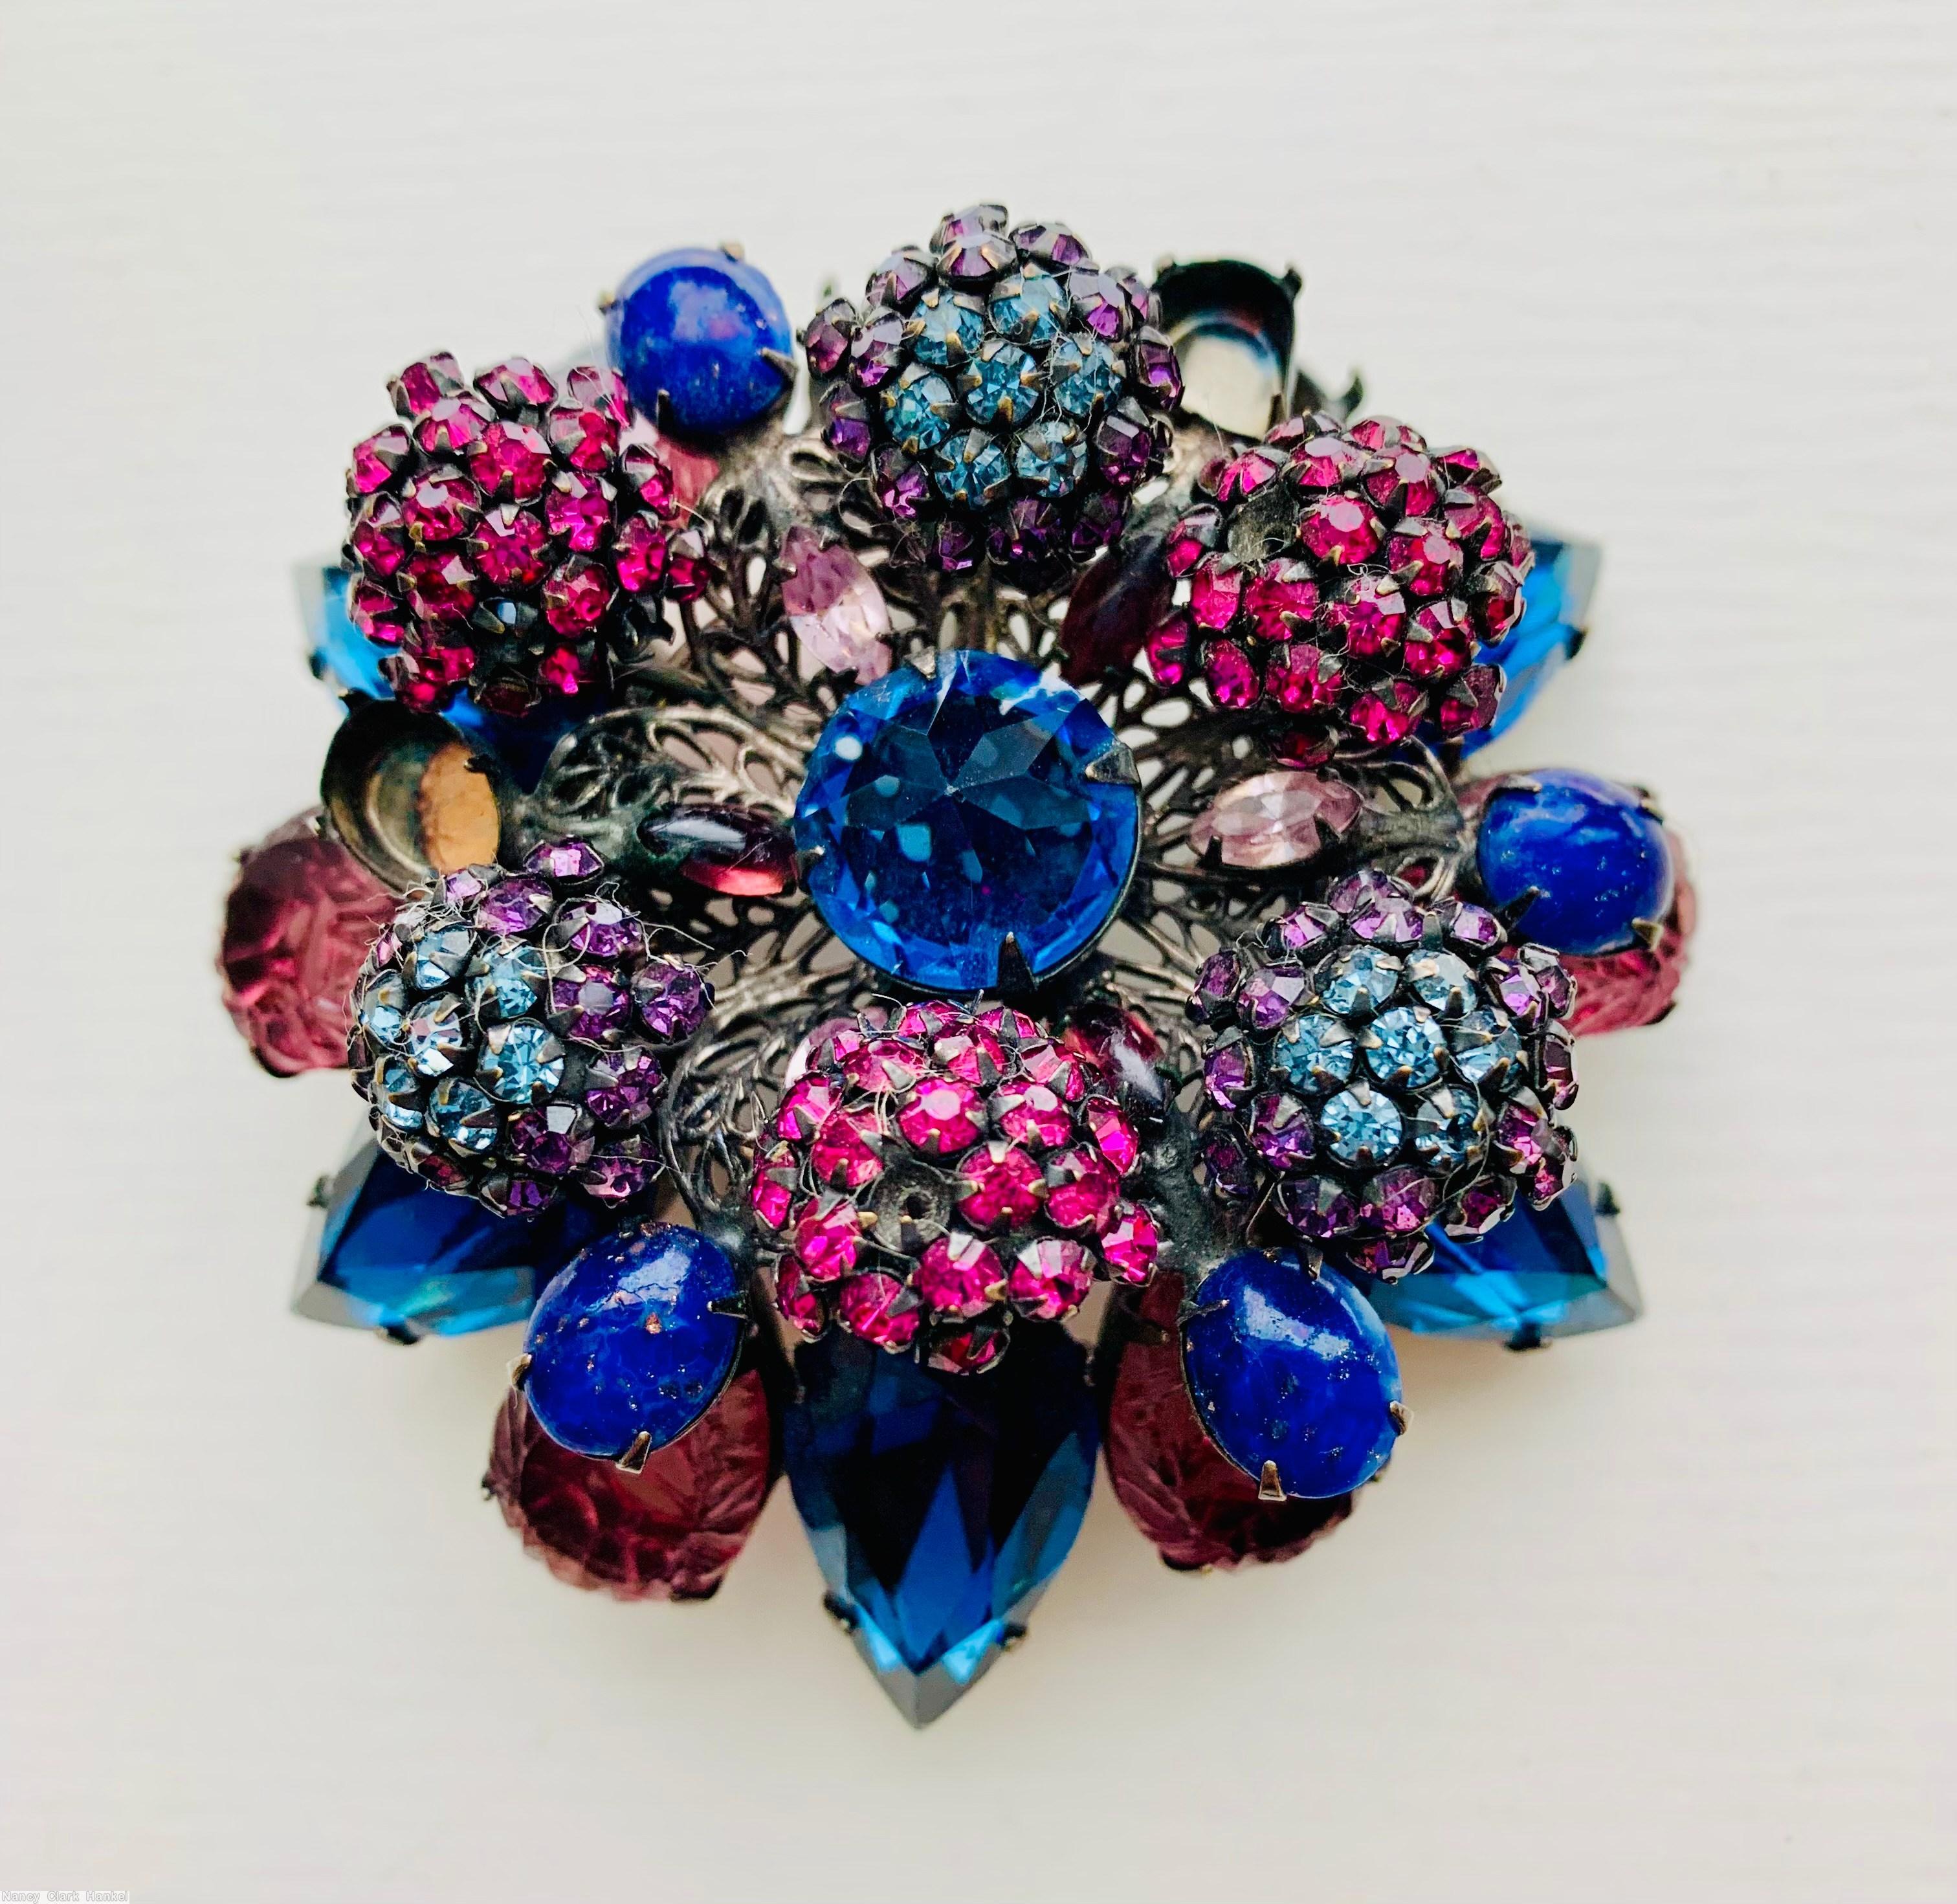 Schreiner 6 clustered ball filigree 2 level radial pin 6 large teardrop large round stone center blue large faceted round center oval lapis aqua purple small chaton clustered ball raspberry cracked ice teardrop large faceted blue teardrop pink small navette jewelry